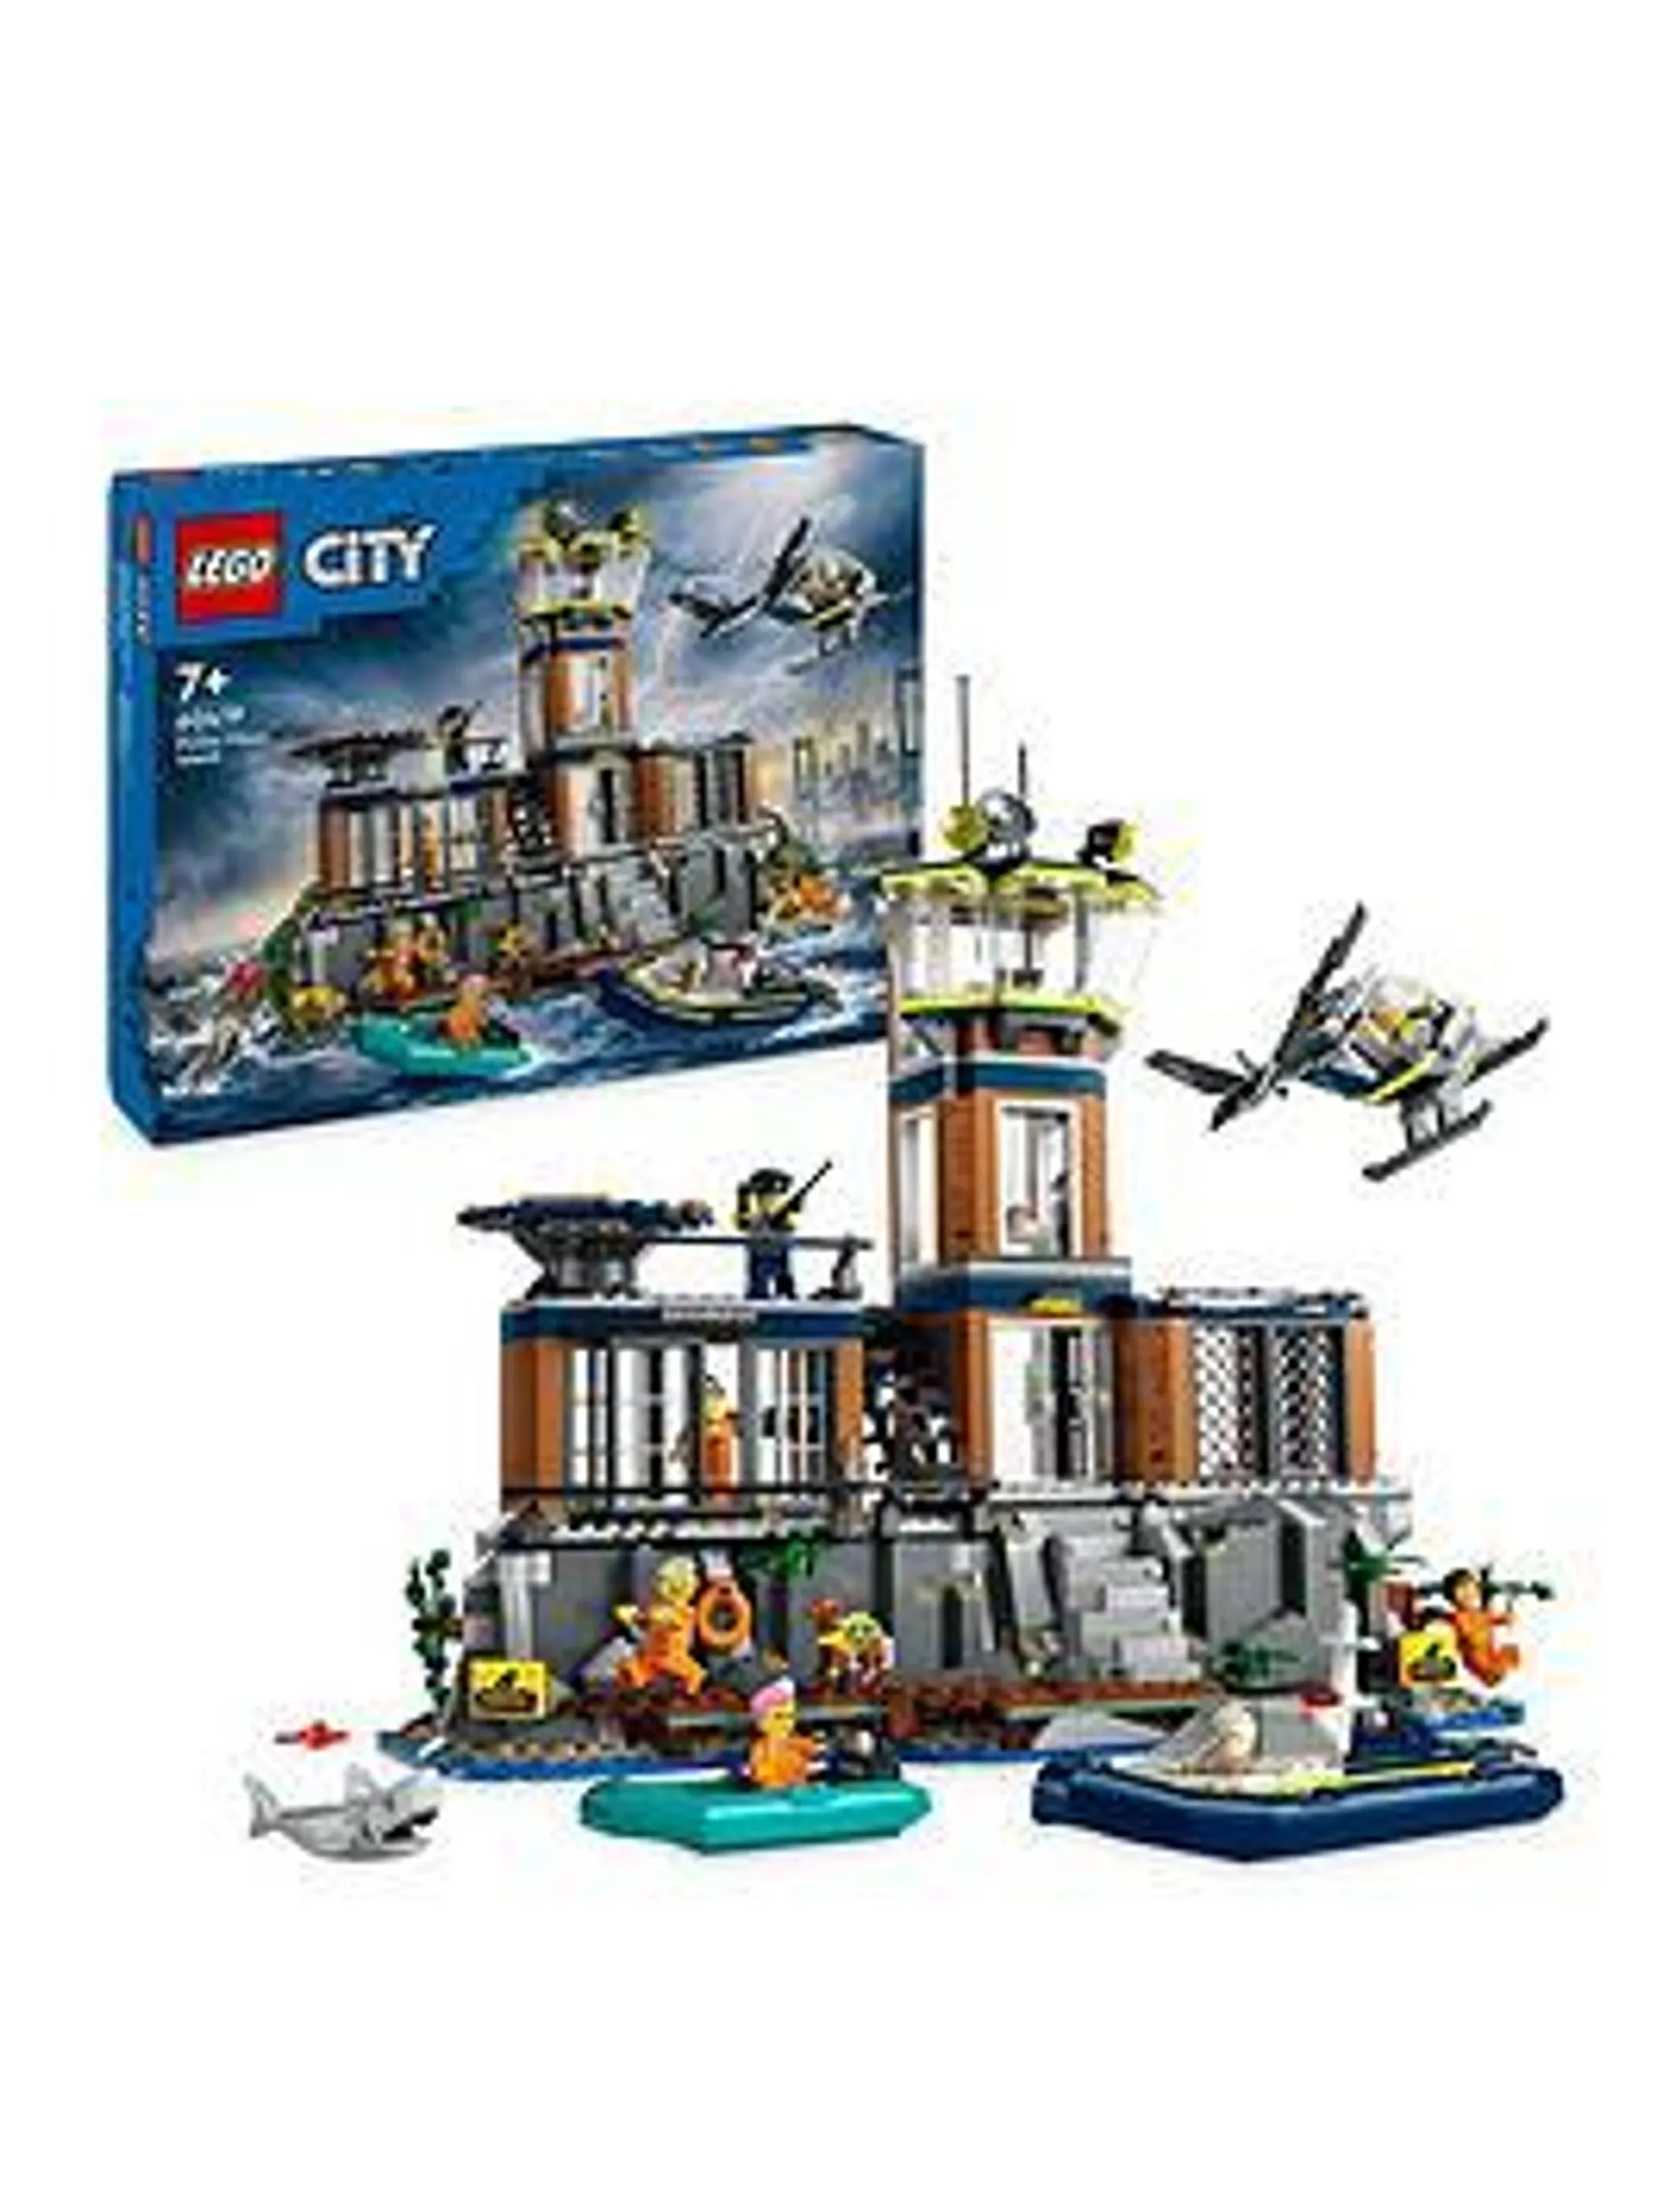 Police Prison Island Building Toy 60419